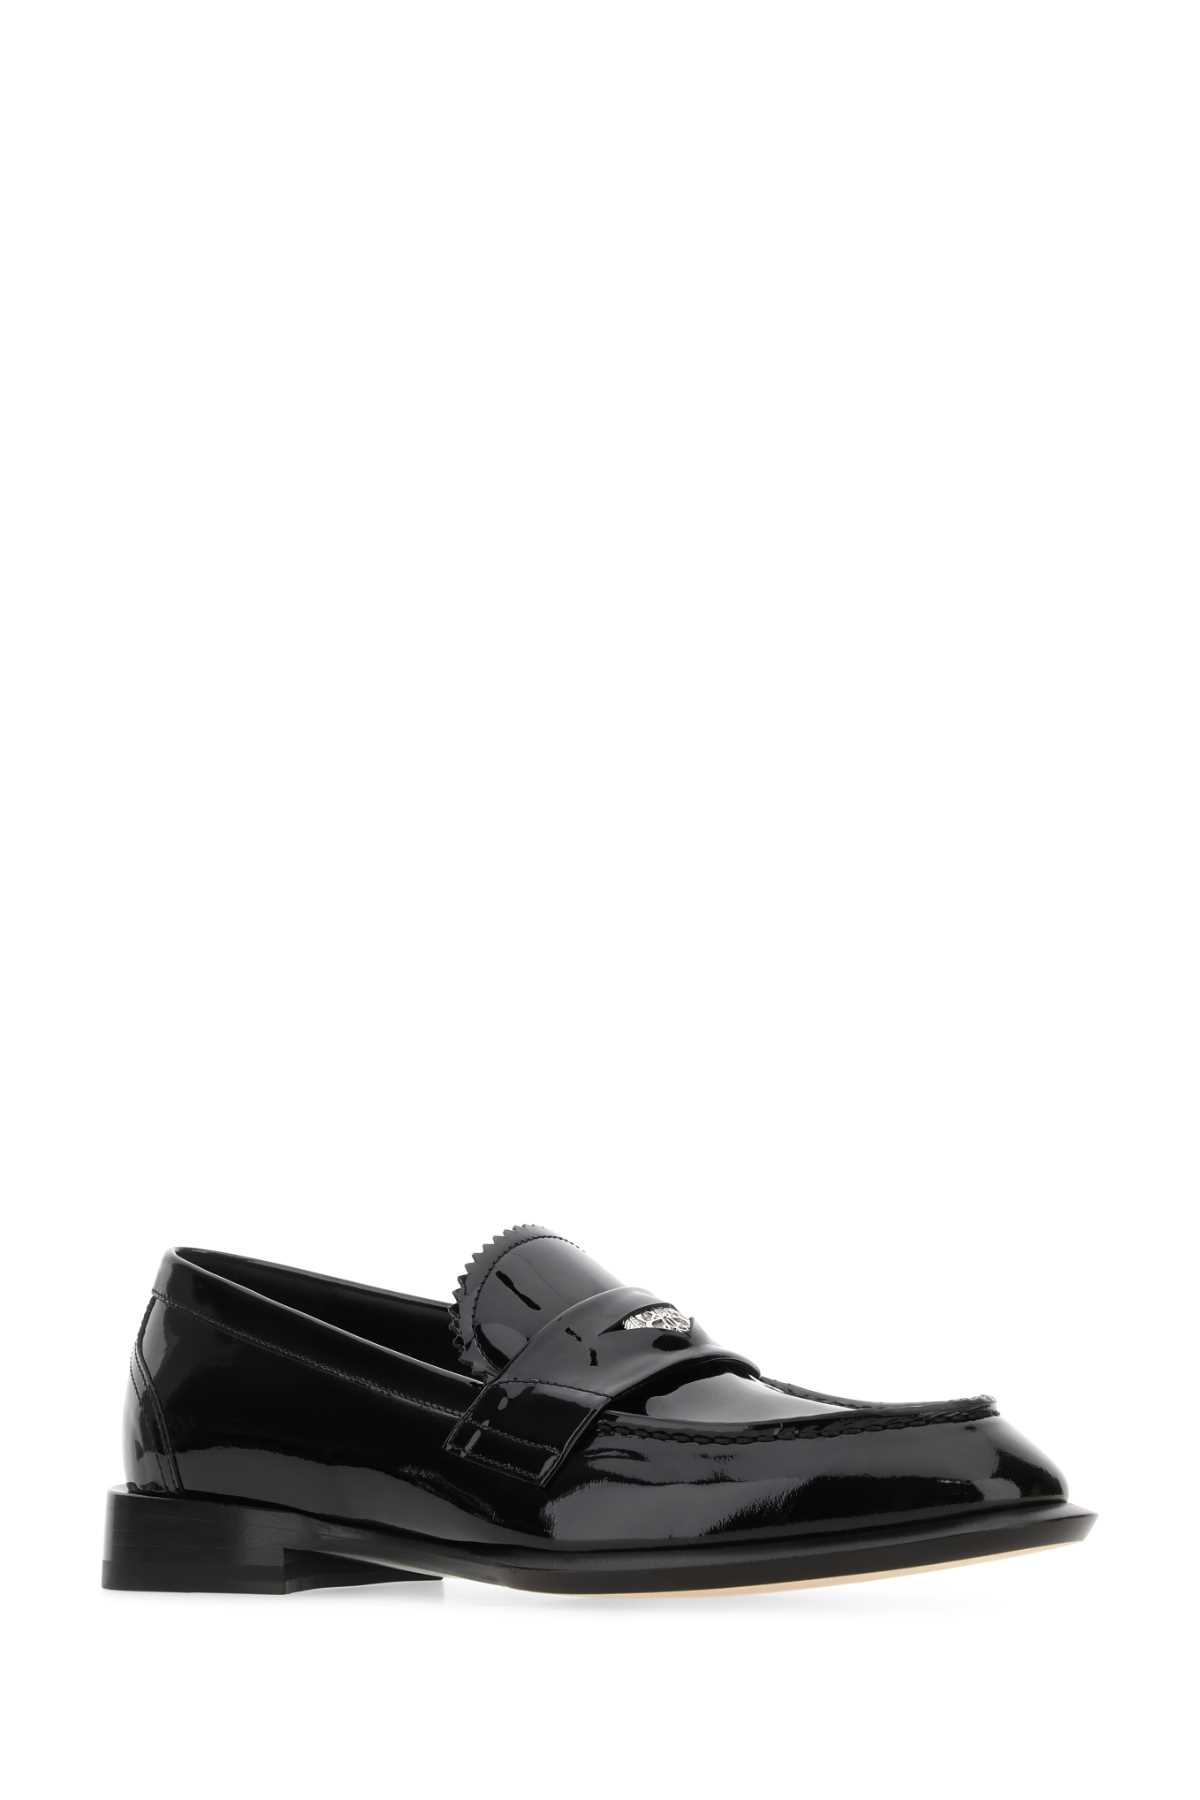 Shop Alexander Mcqueen Black Leather Loafers In 1081